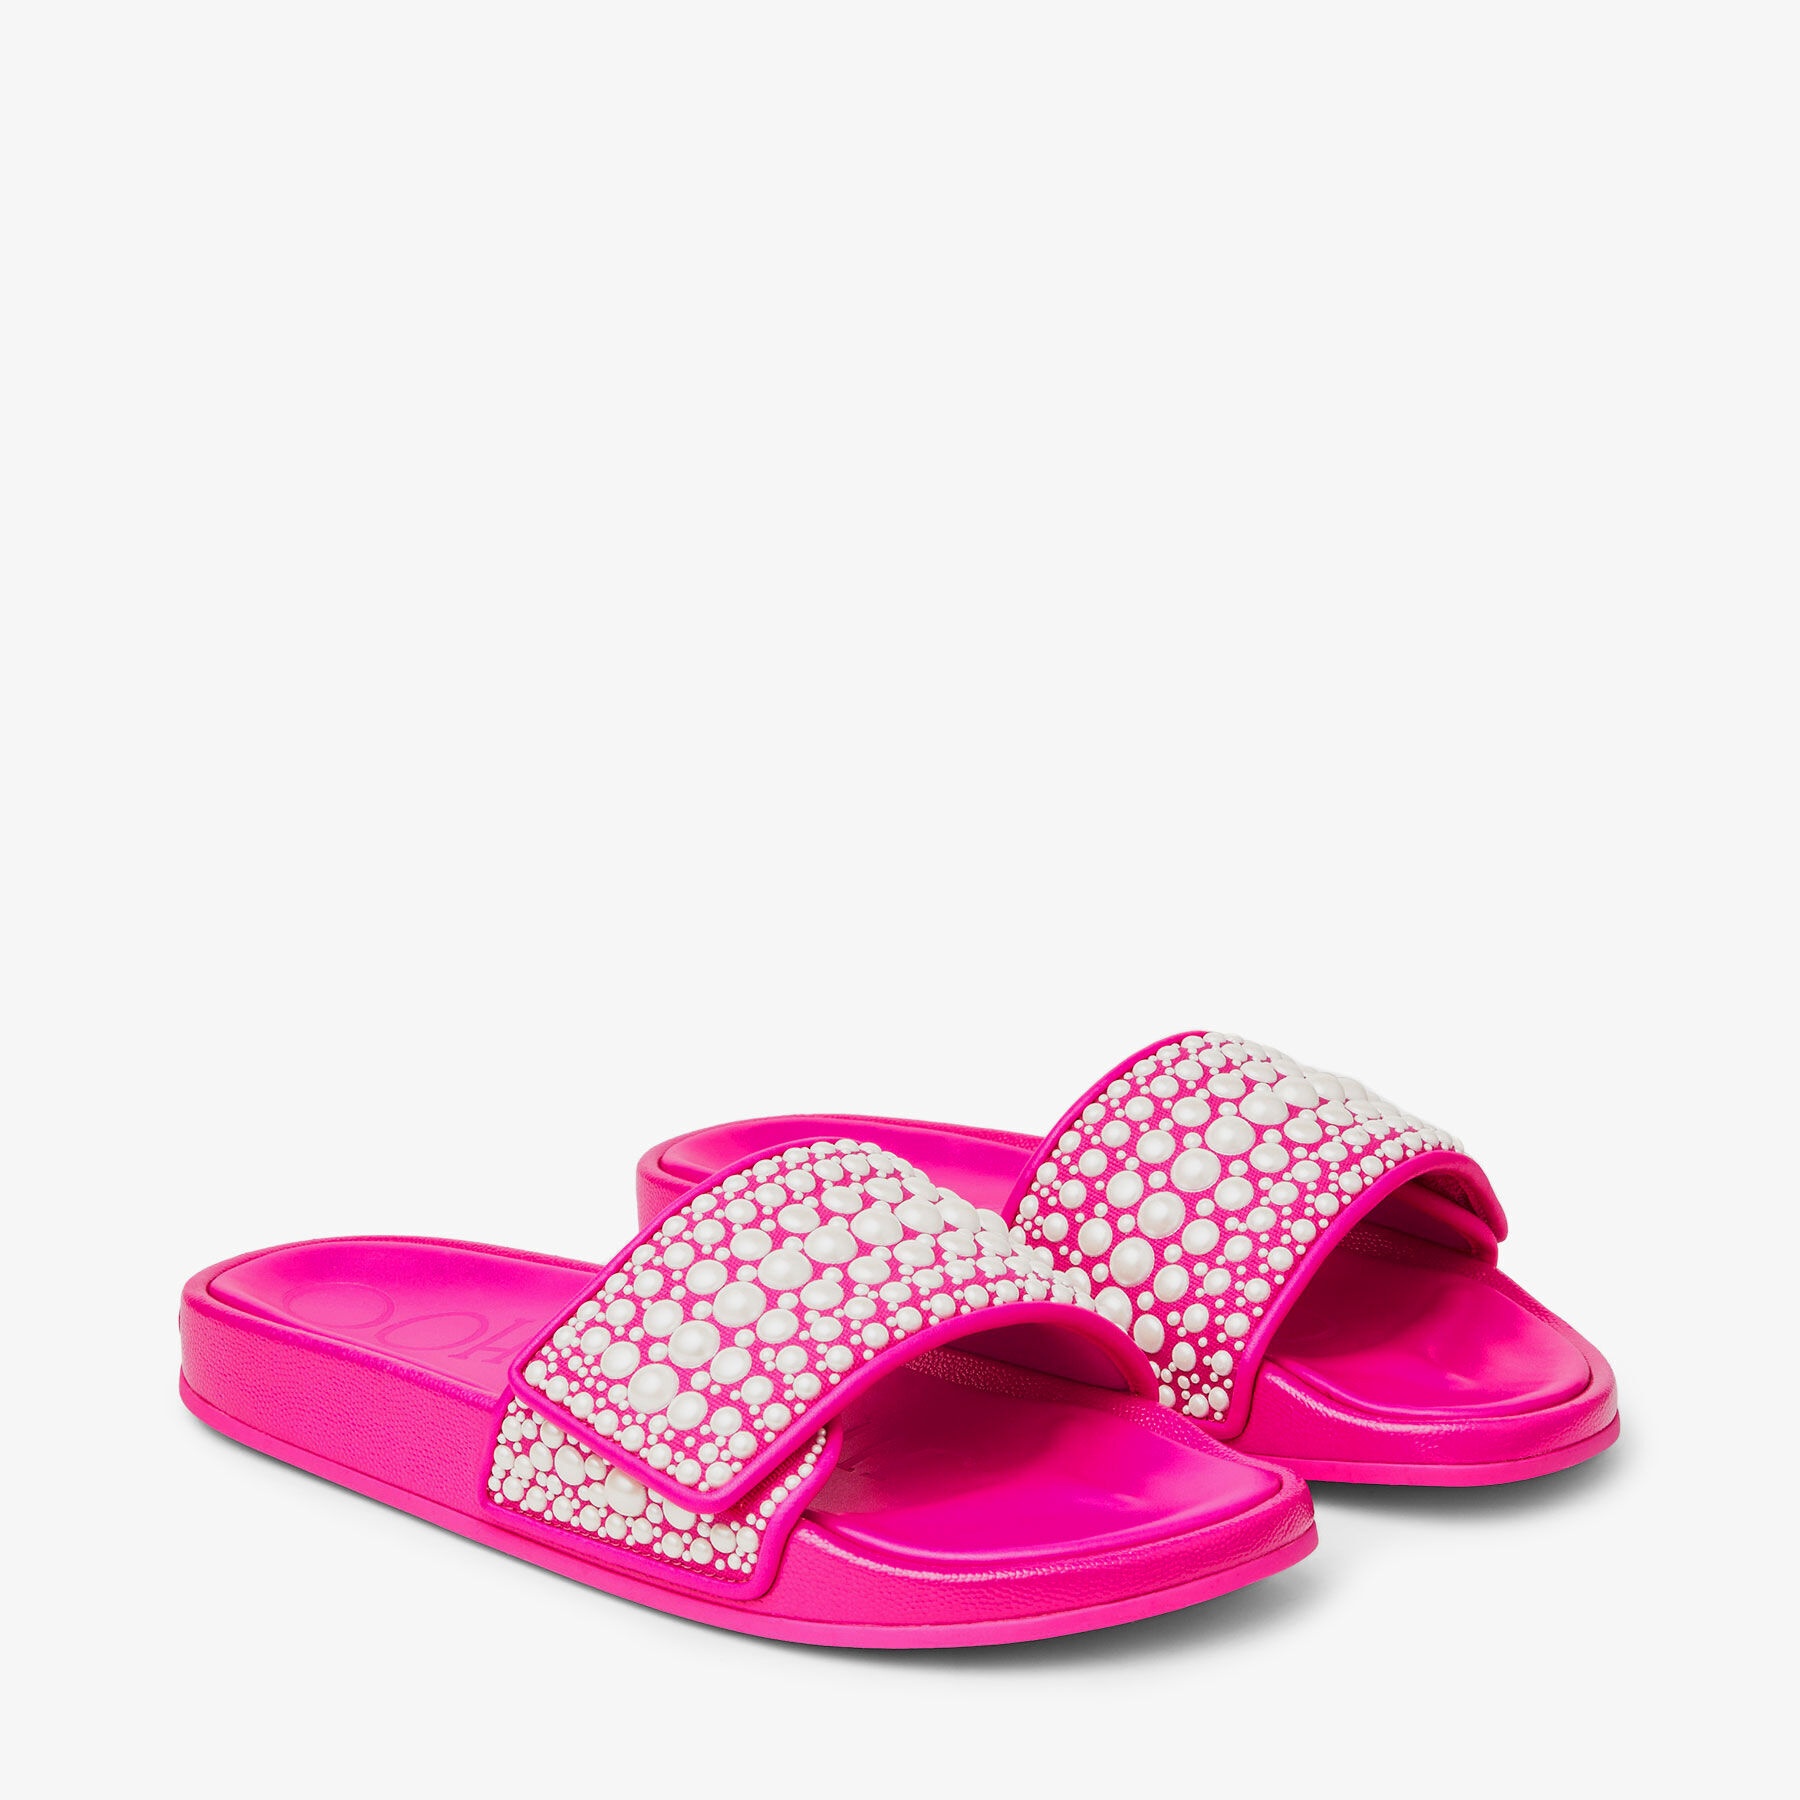 Fitz/F
Fuchsia Leather and Canvas Slides with Pearl Embellishment - 3